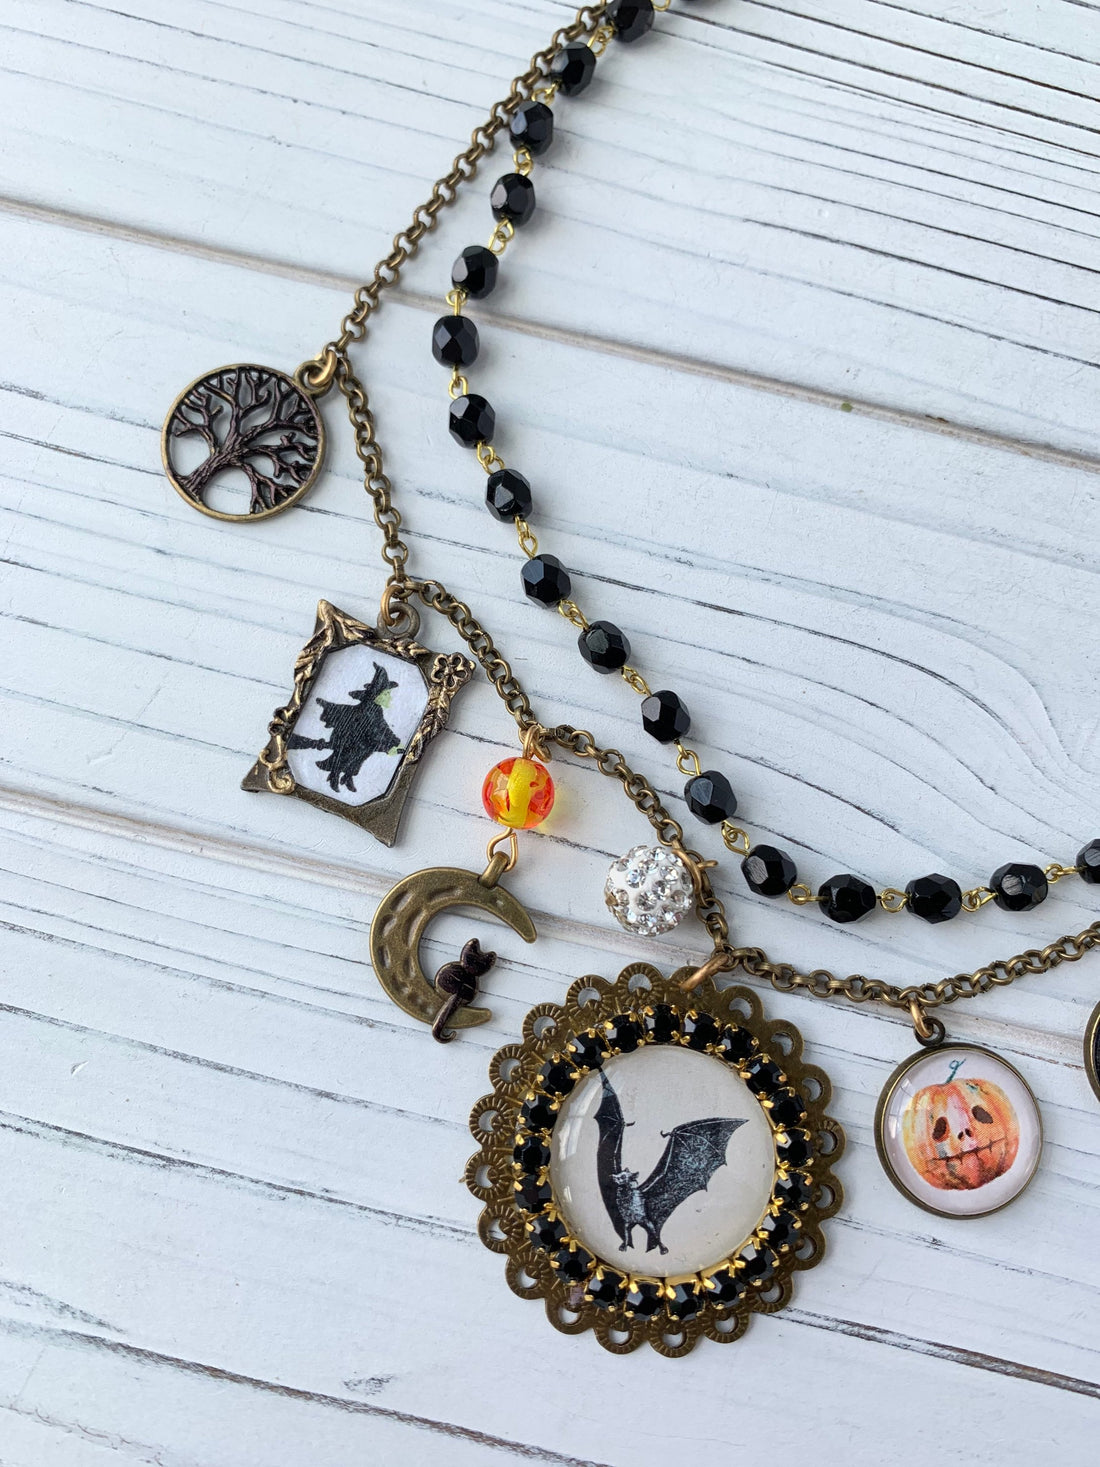 Ghostly Charm Necklace - Halloween Charm Necklace - Witch Jewelry